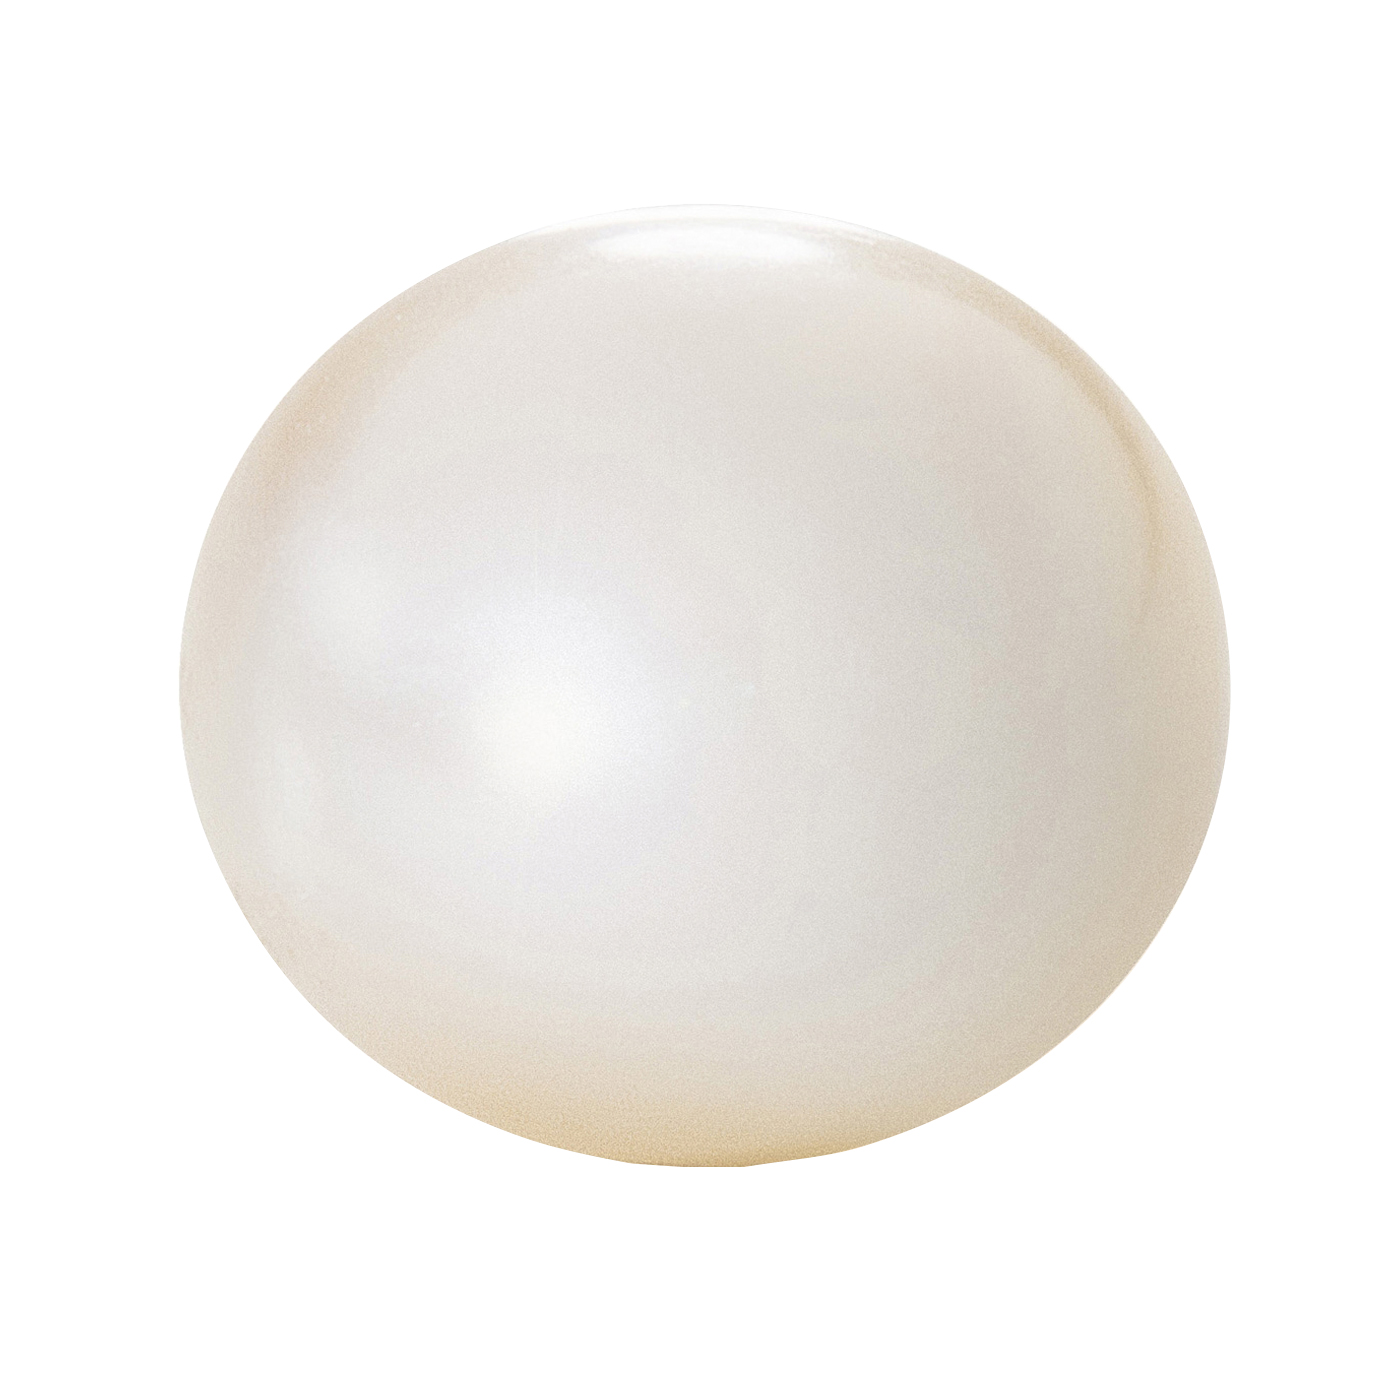 Cultured Pearl, Freshwater, Bouton, ø 7.5-8.0 mm, White - 1 piece